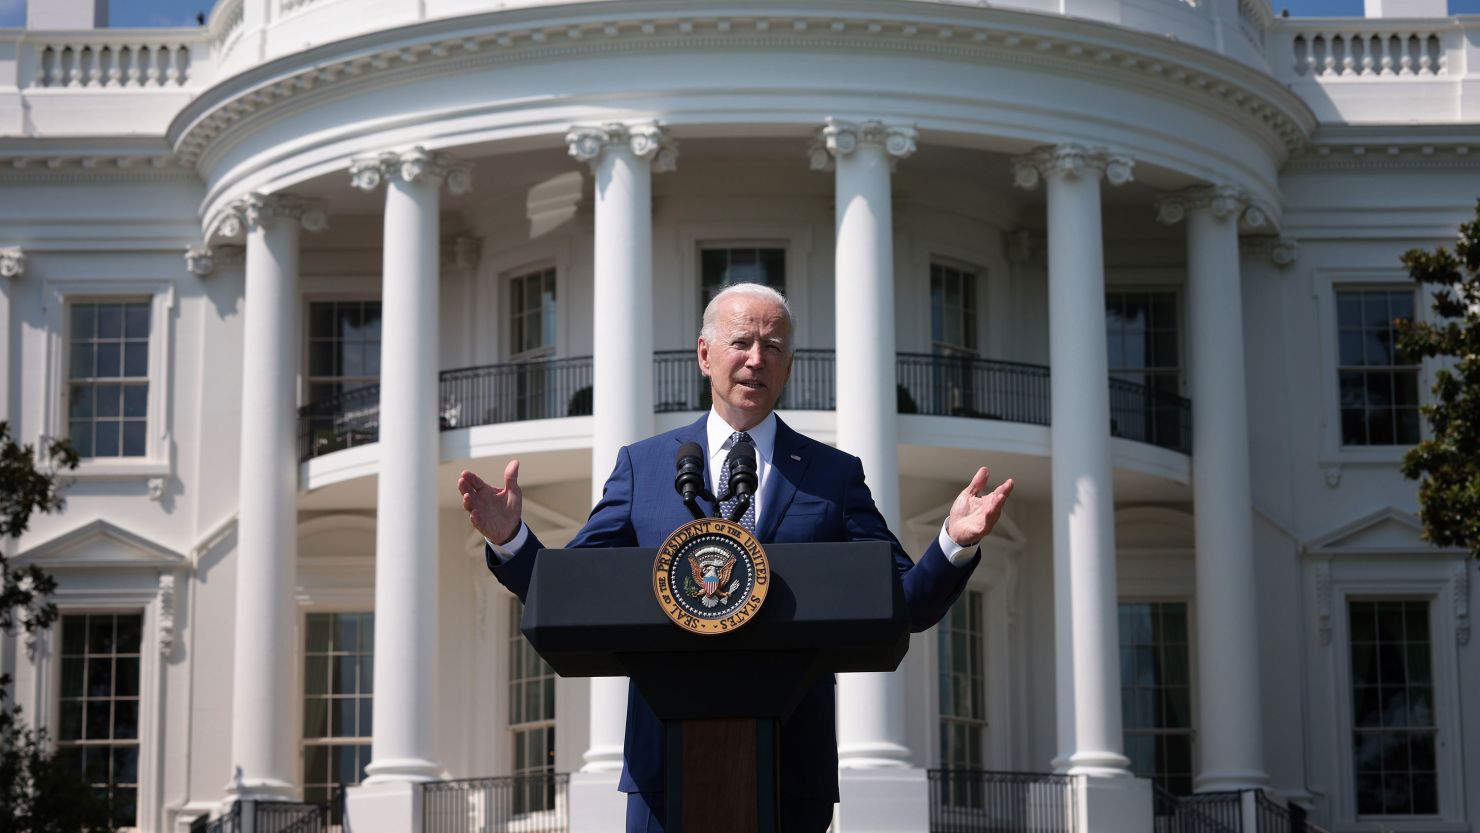 In this August 5, 2021, file photo, President Joe Biden delivers remarks during an event on the South Lawn of the White House in Washington, DC. 